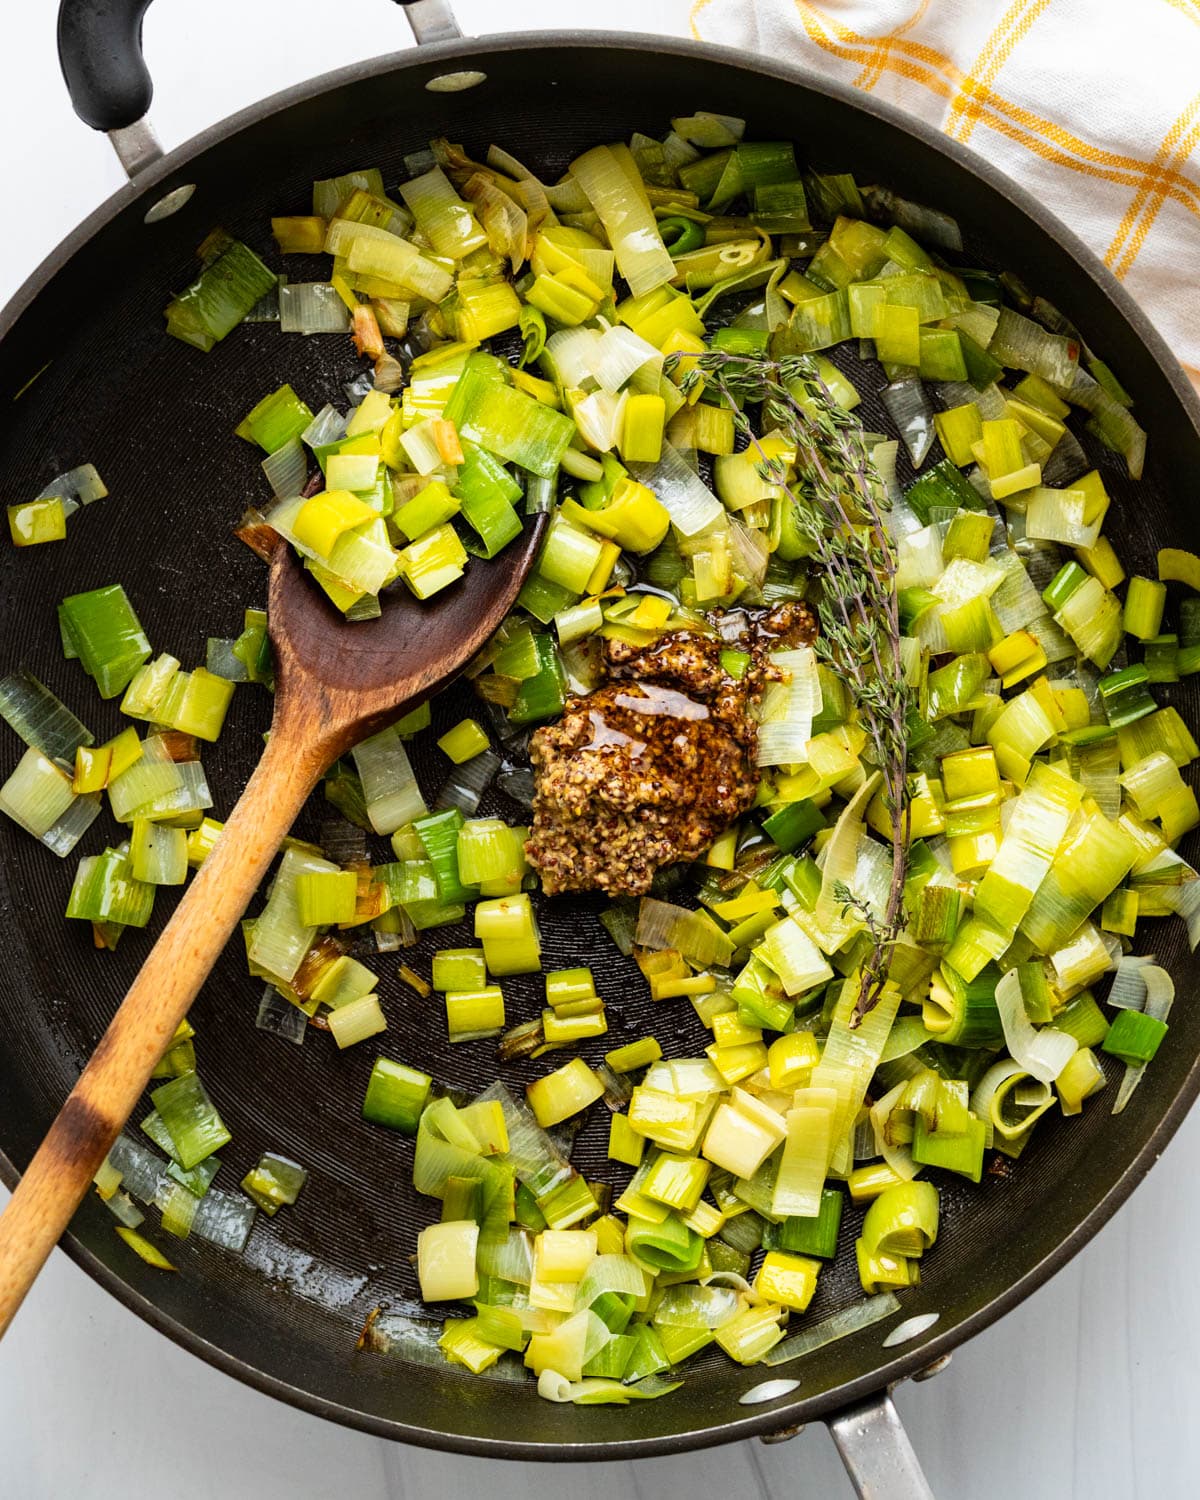 Sweat the leeks and add whole grain Dijon mustard, honey, and thyme.